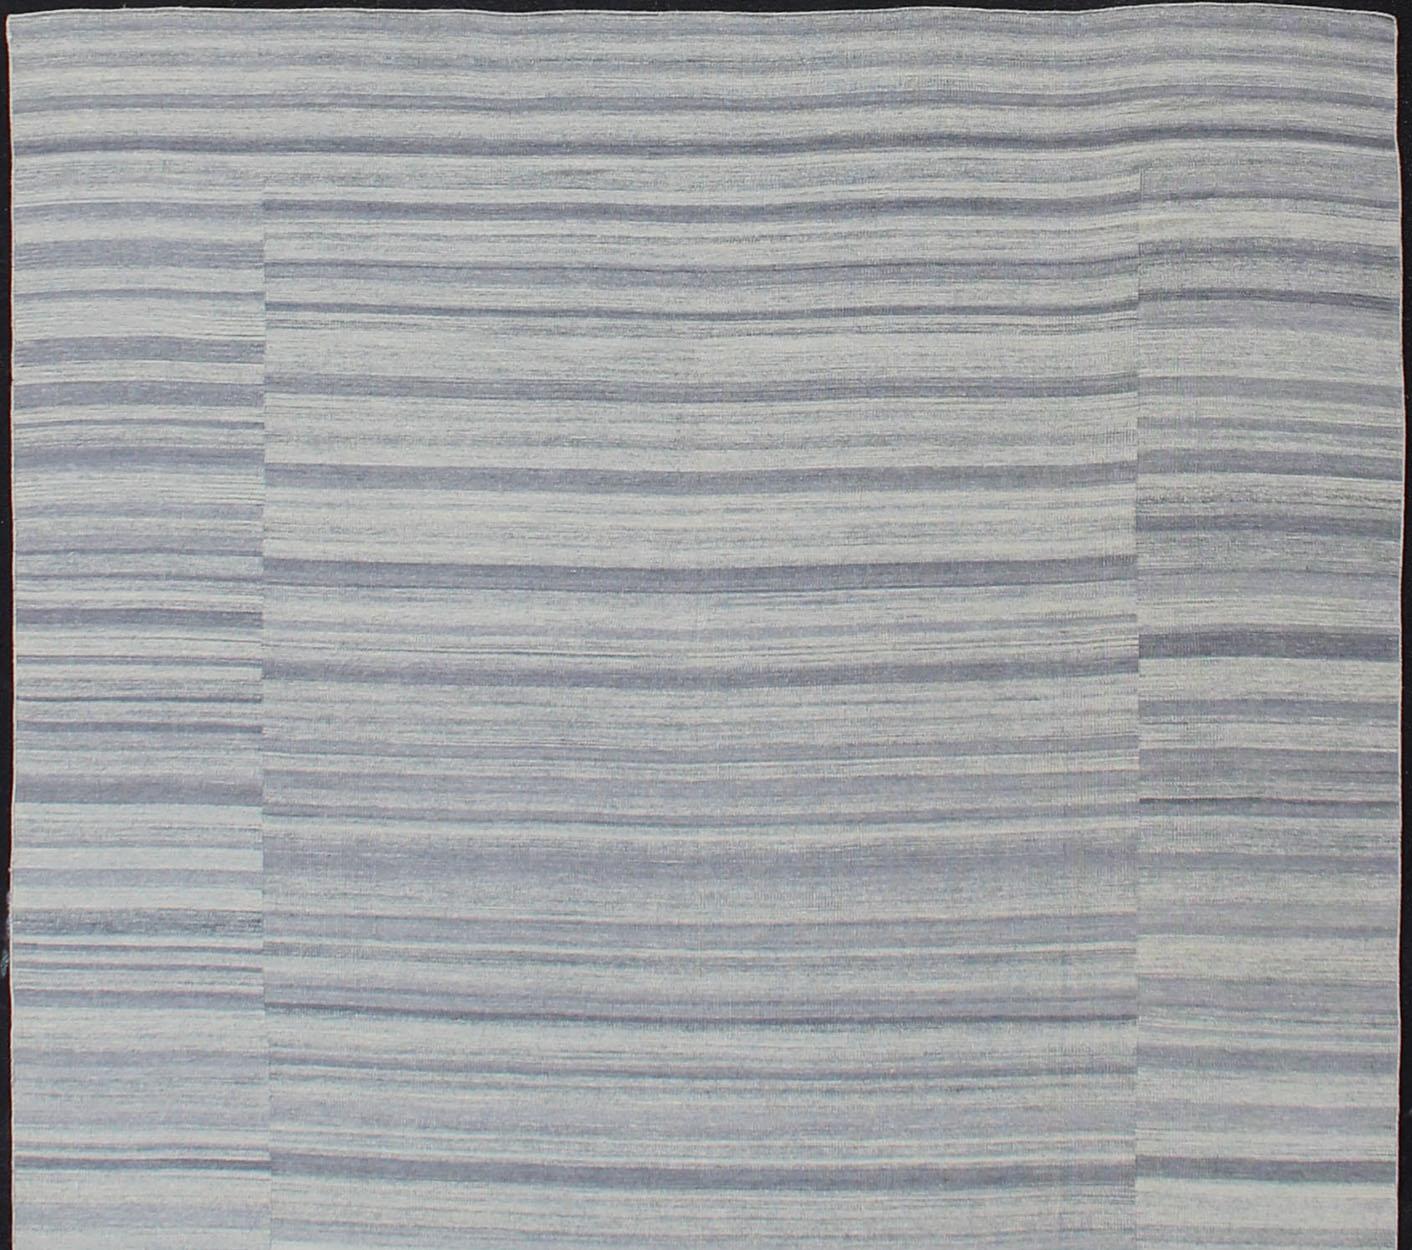 Casual Kilim and Modern design Kilim rug with striped design in muted blues and grays, rug OB-103715362-60180007, country of origin / type: India / Kilim

This Casual modern rug features a striped design and a flat-woven texture. The color palette